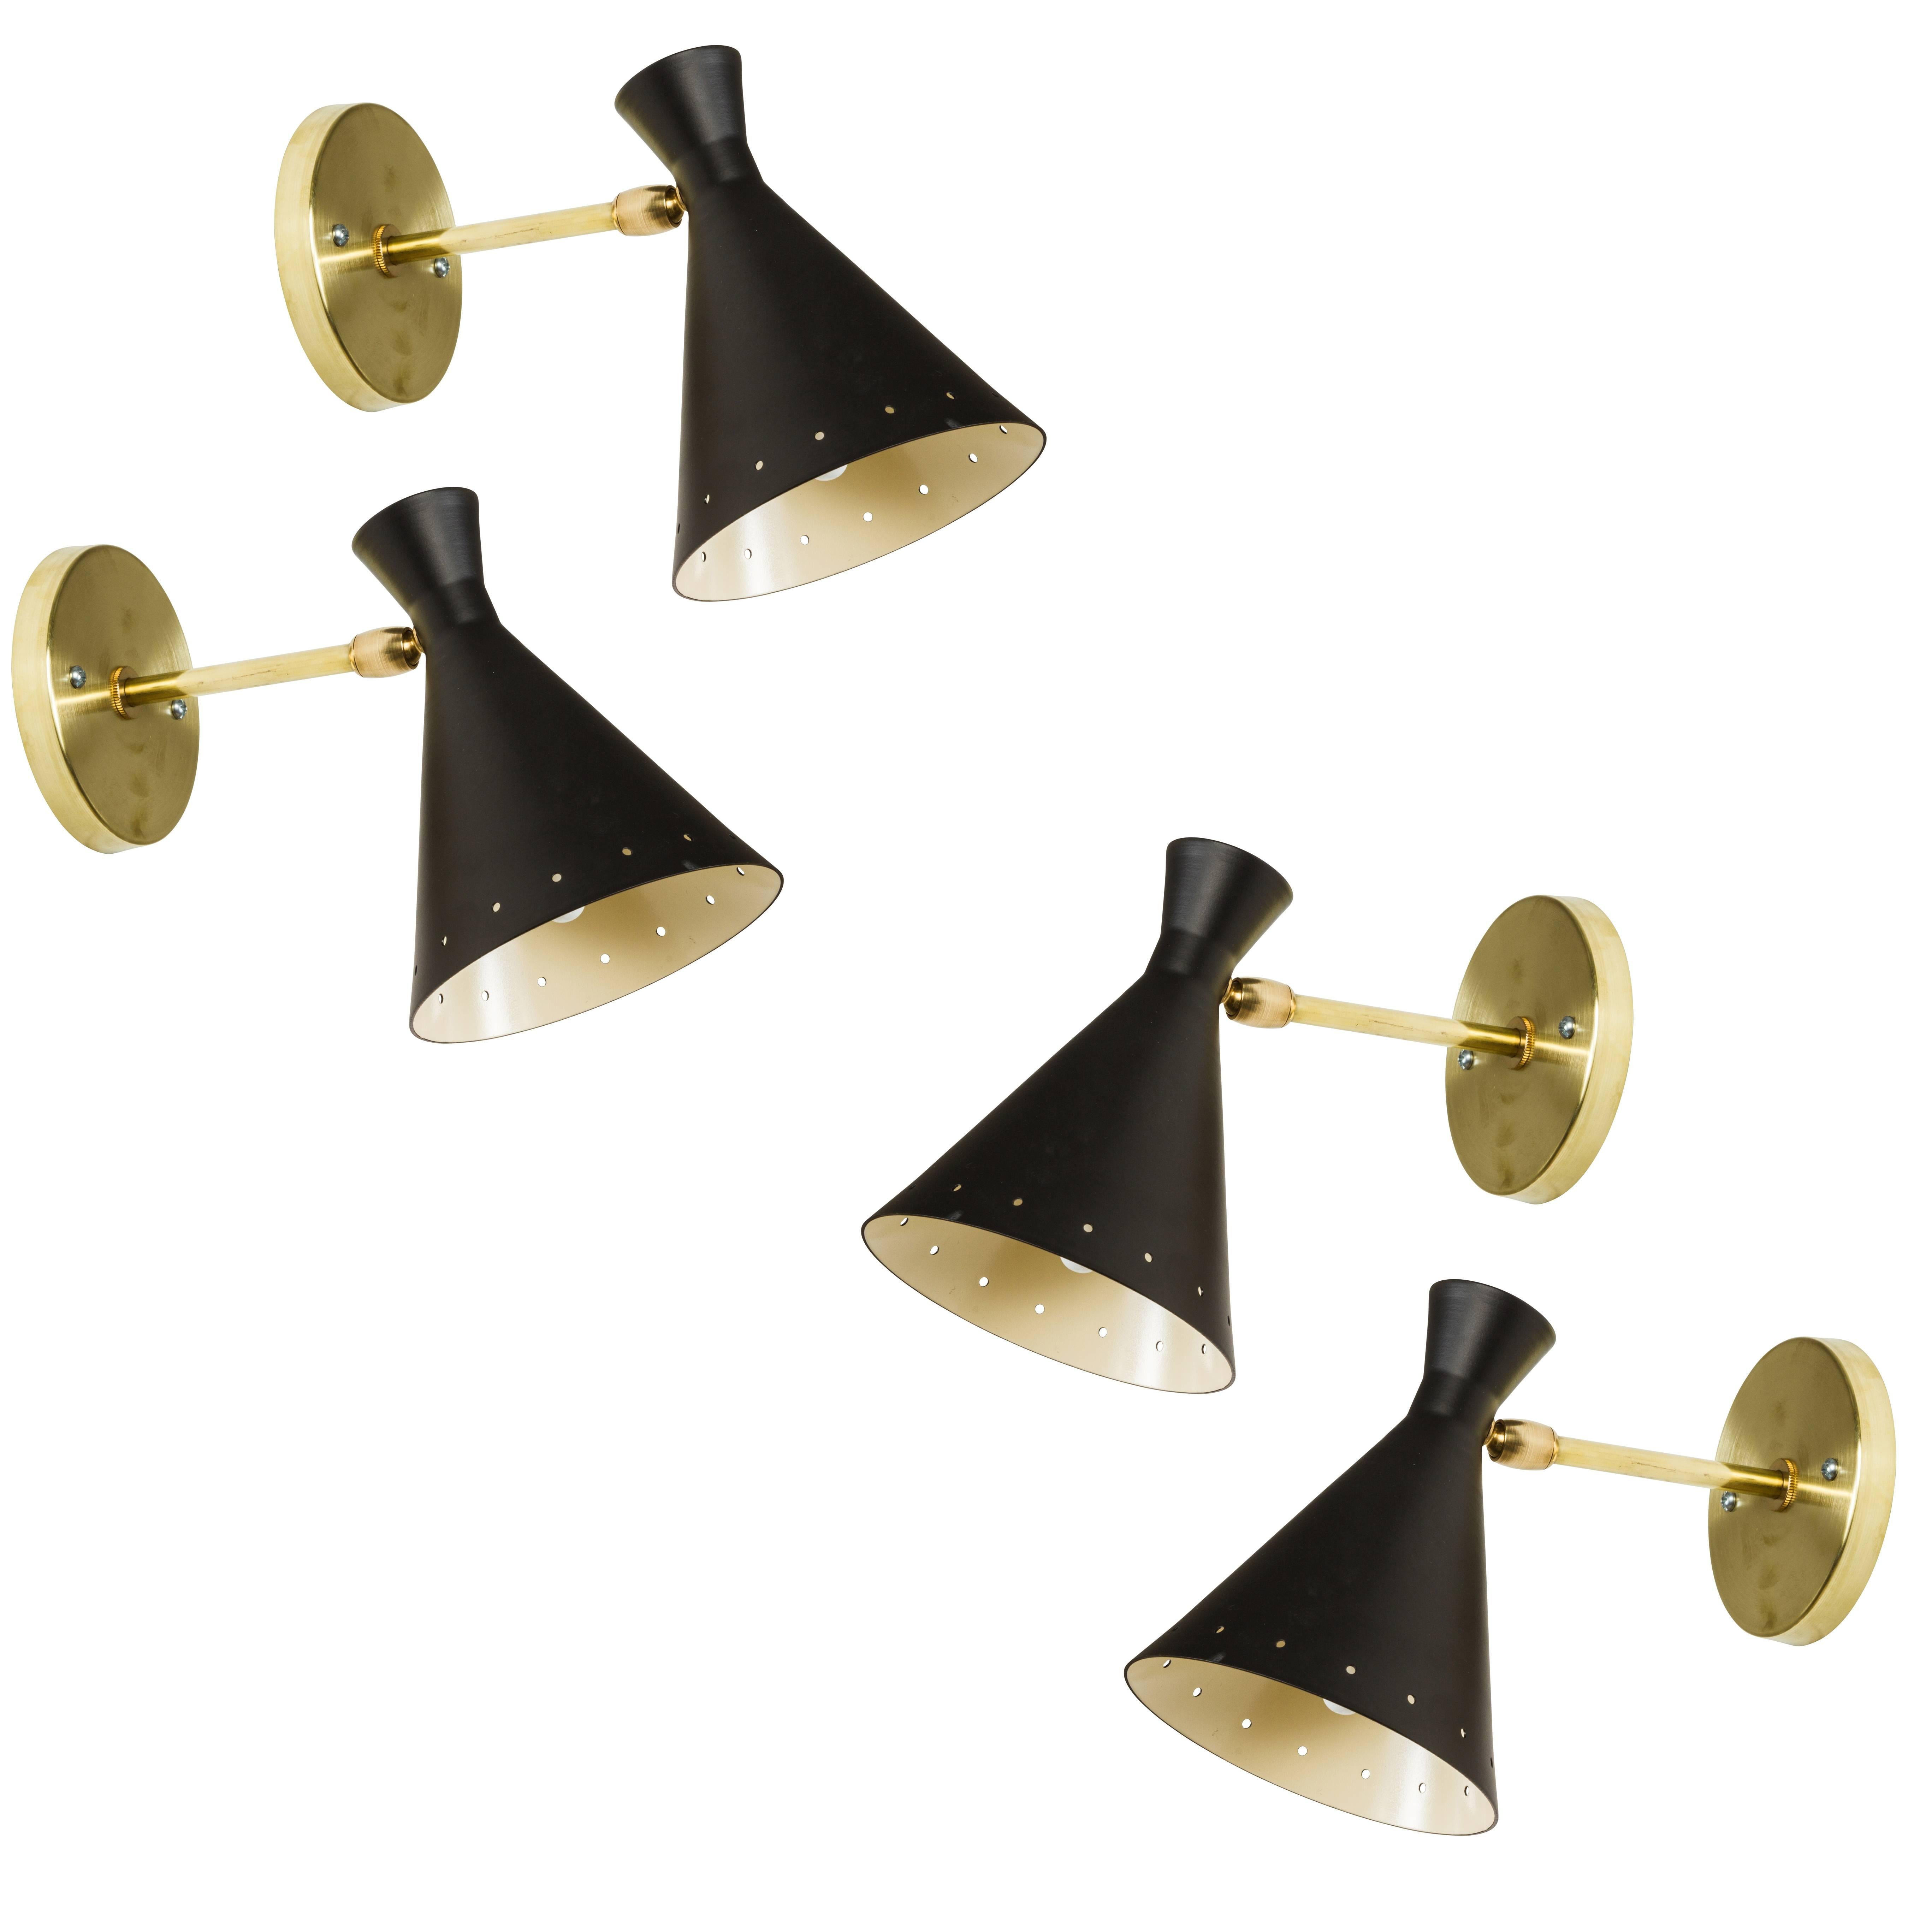 Petite Italian sconce in the style of Stilnovo. Executed in brass, black painted metal and custom brass backplate for US. 

Not UL listed, but available from authorized 3rd party vendor upon request for an additional fee. Please contact dealer to